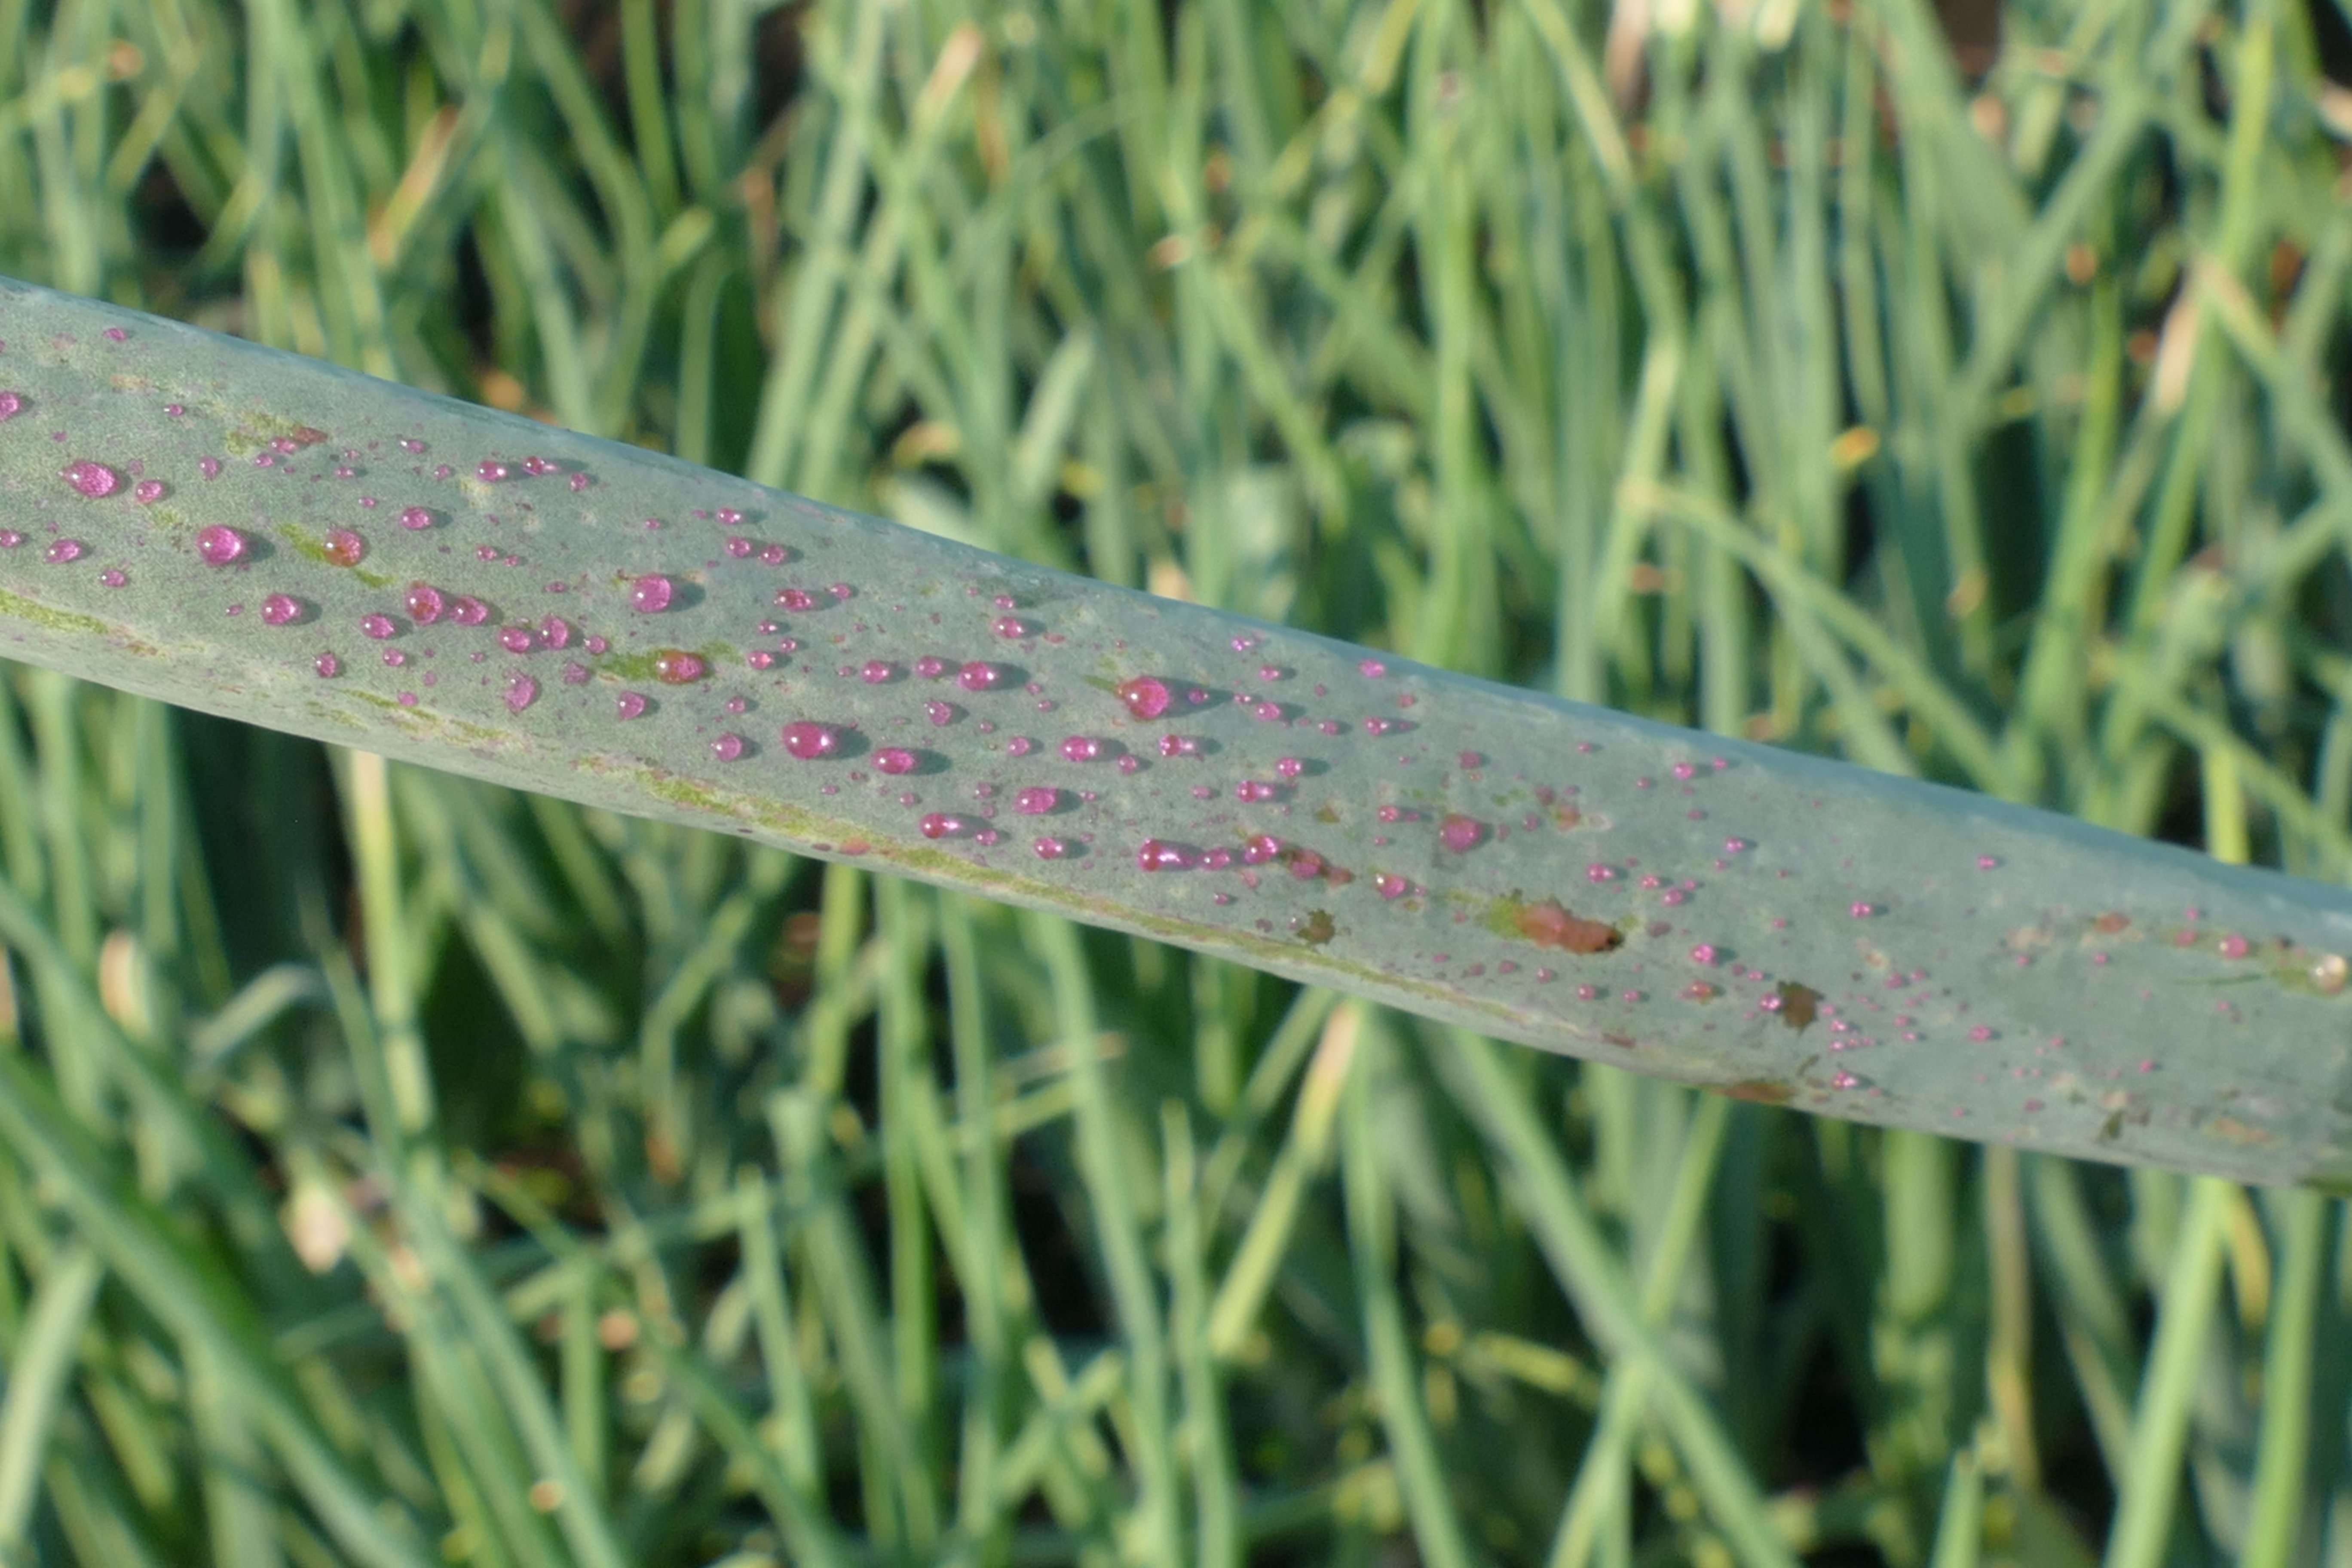 Small droplets of rhodamine dye on the leaves of onions